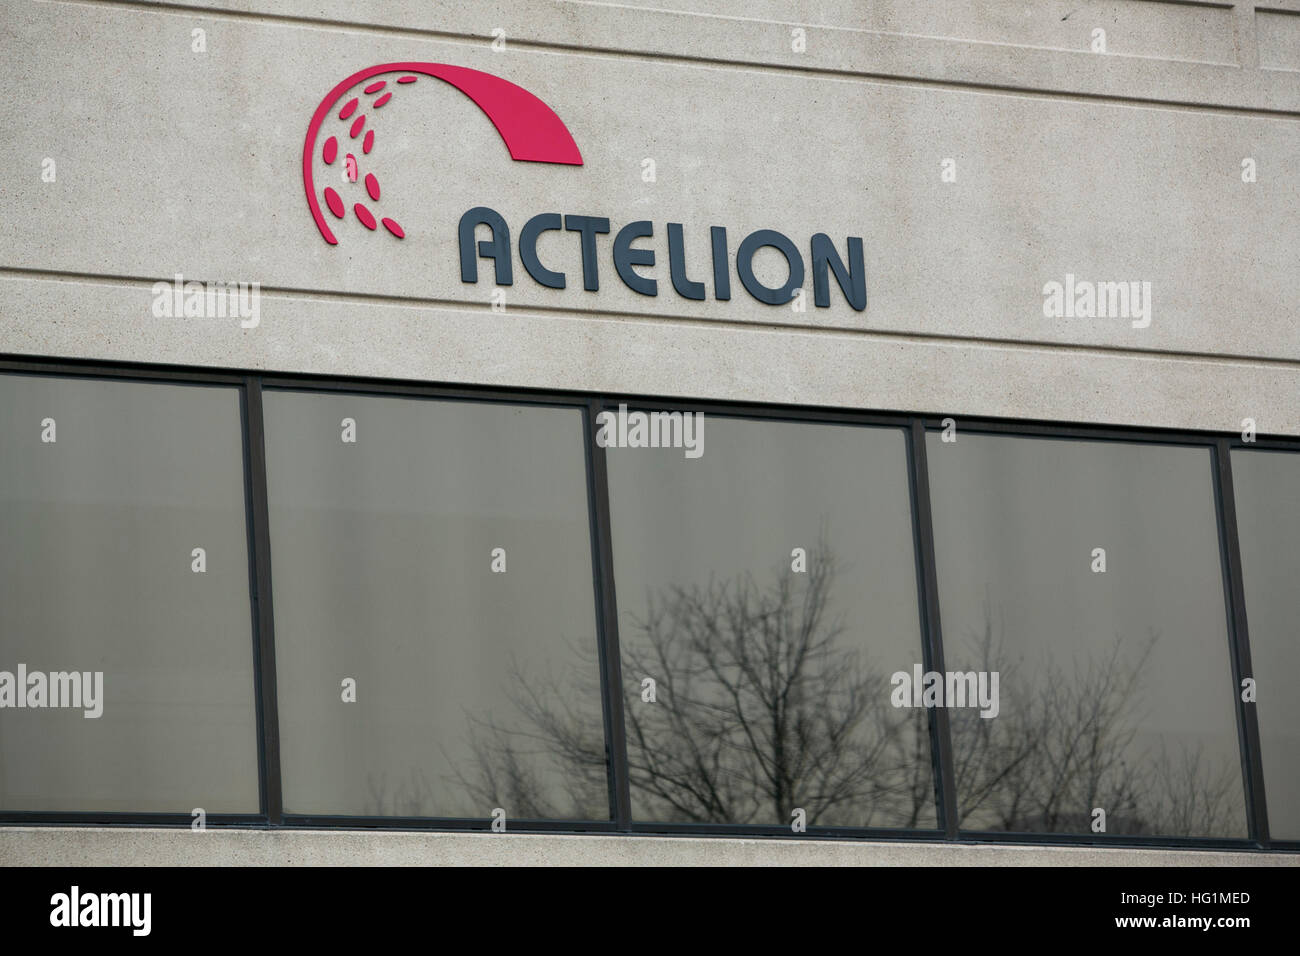 A logo sign outside of a facility occupied by Actelion Pharmaceuticals Ltd., in Cherry Hill, New Jersey on December 11, 2016. Stock Photo